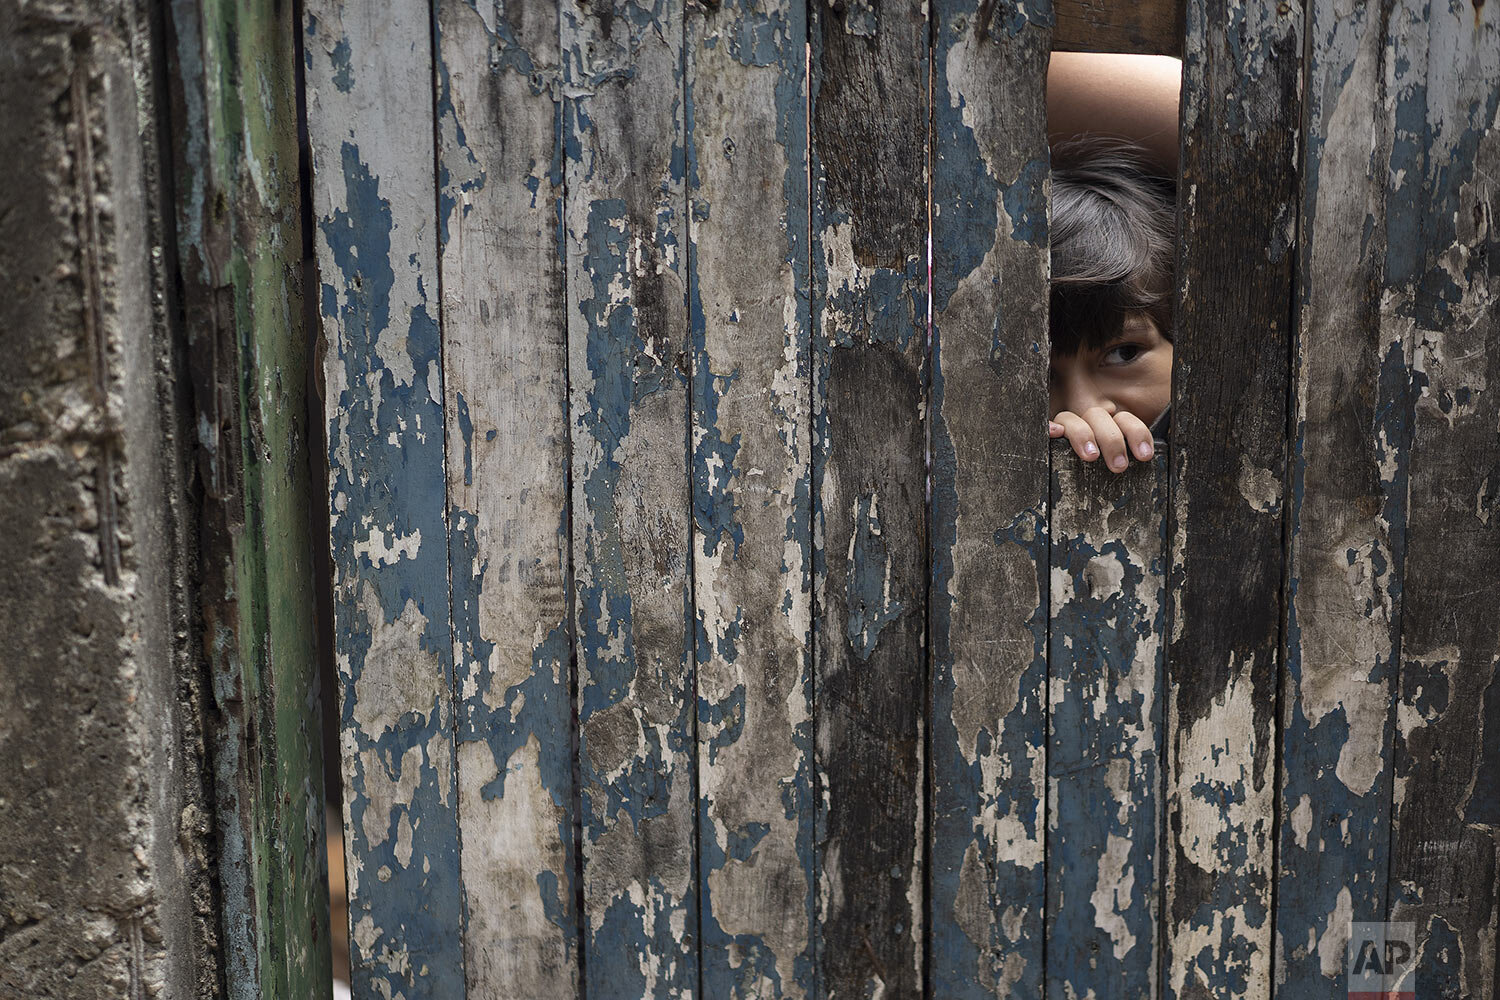  A boy peaks from the dilapidated doorway of his home as his mother receives soap and detergent from volunteers as an effort to avoid the spread of the new coronavirus, in the Rocinha slum of Rio de Janeiro, Brazil, March 24, 2020. (AP Photo/Leo Corr